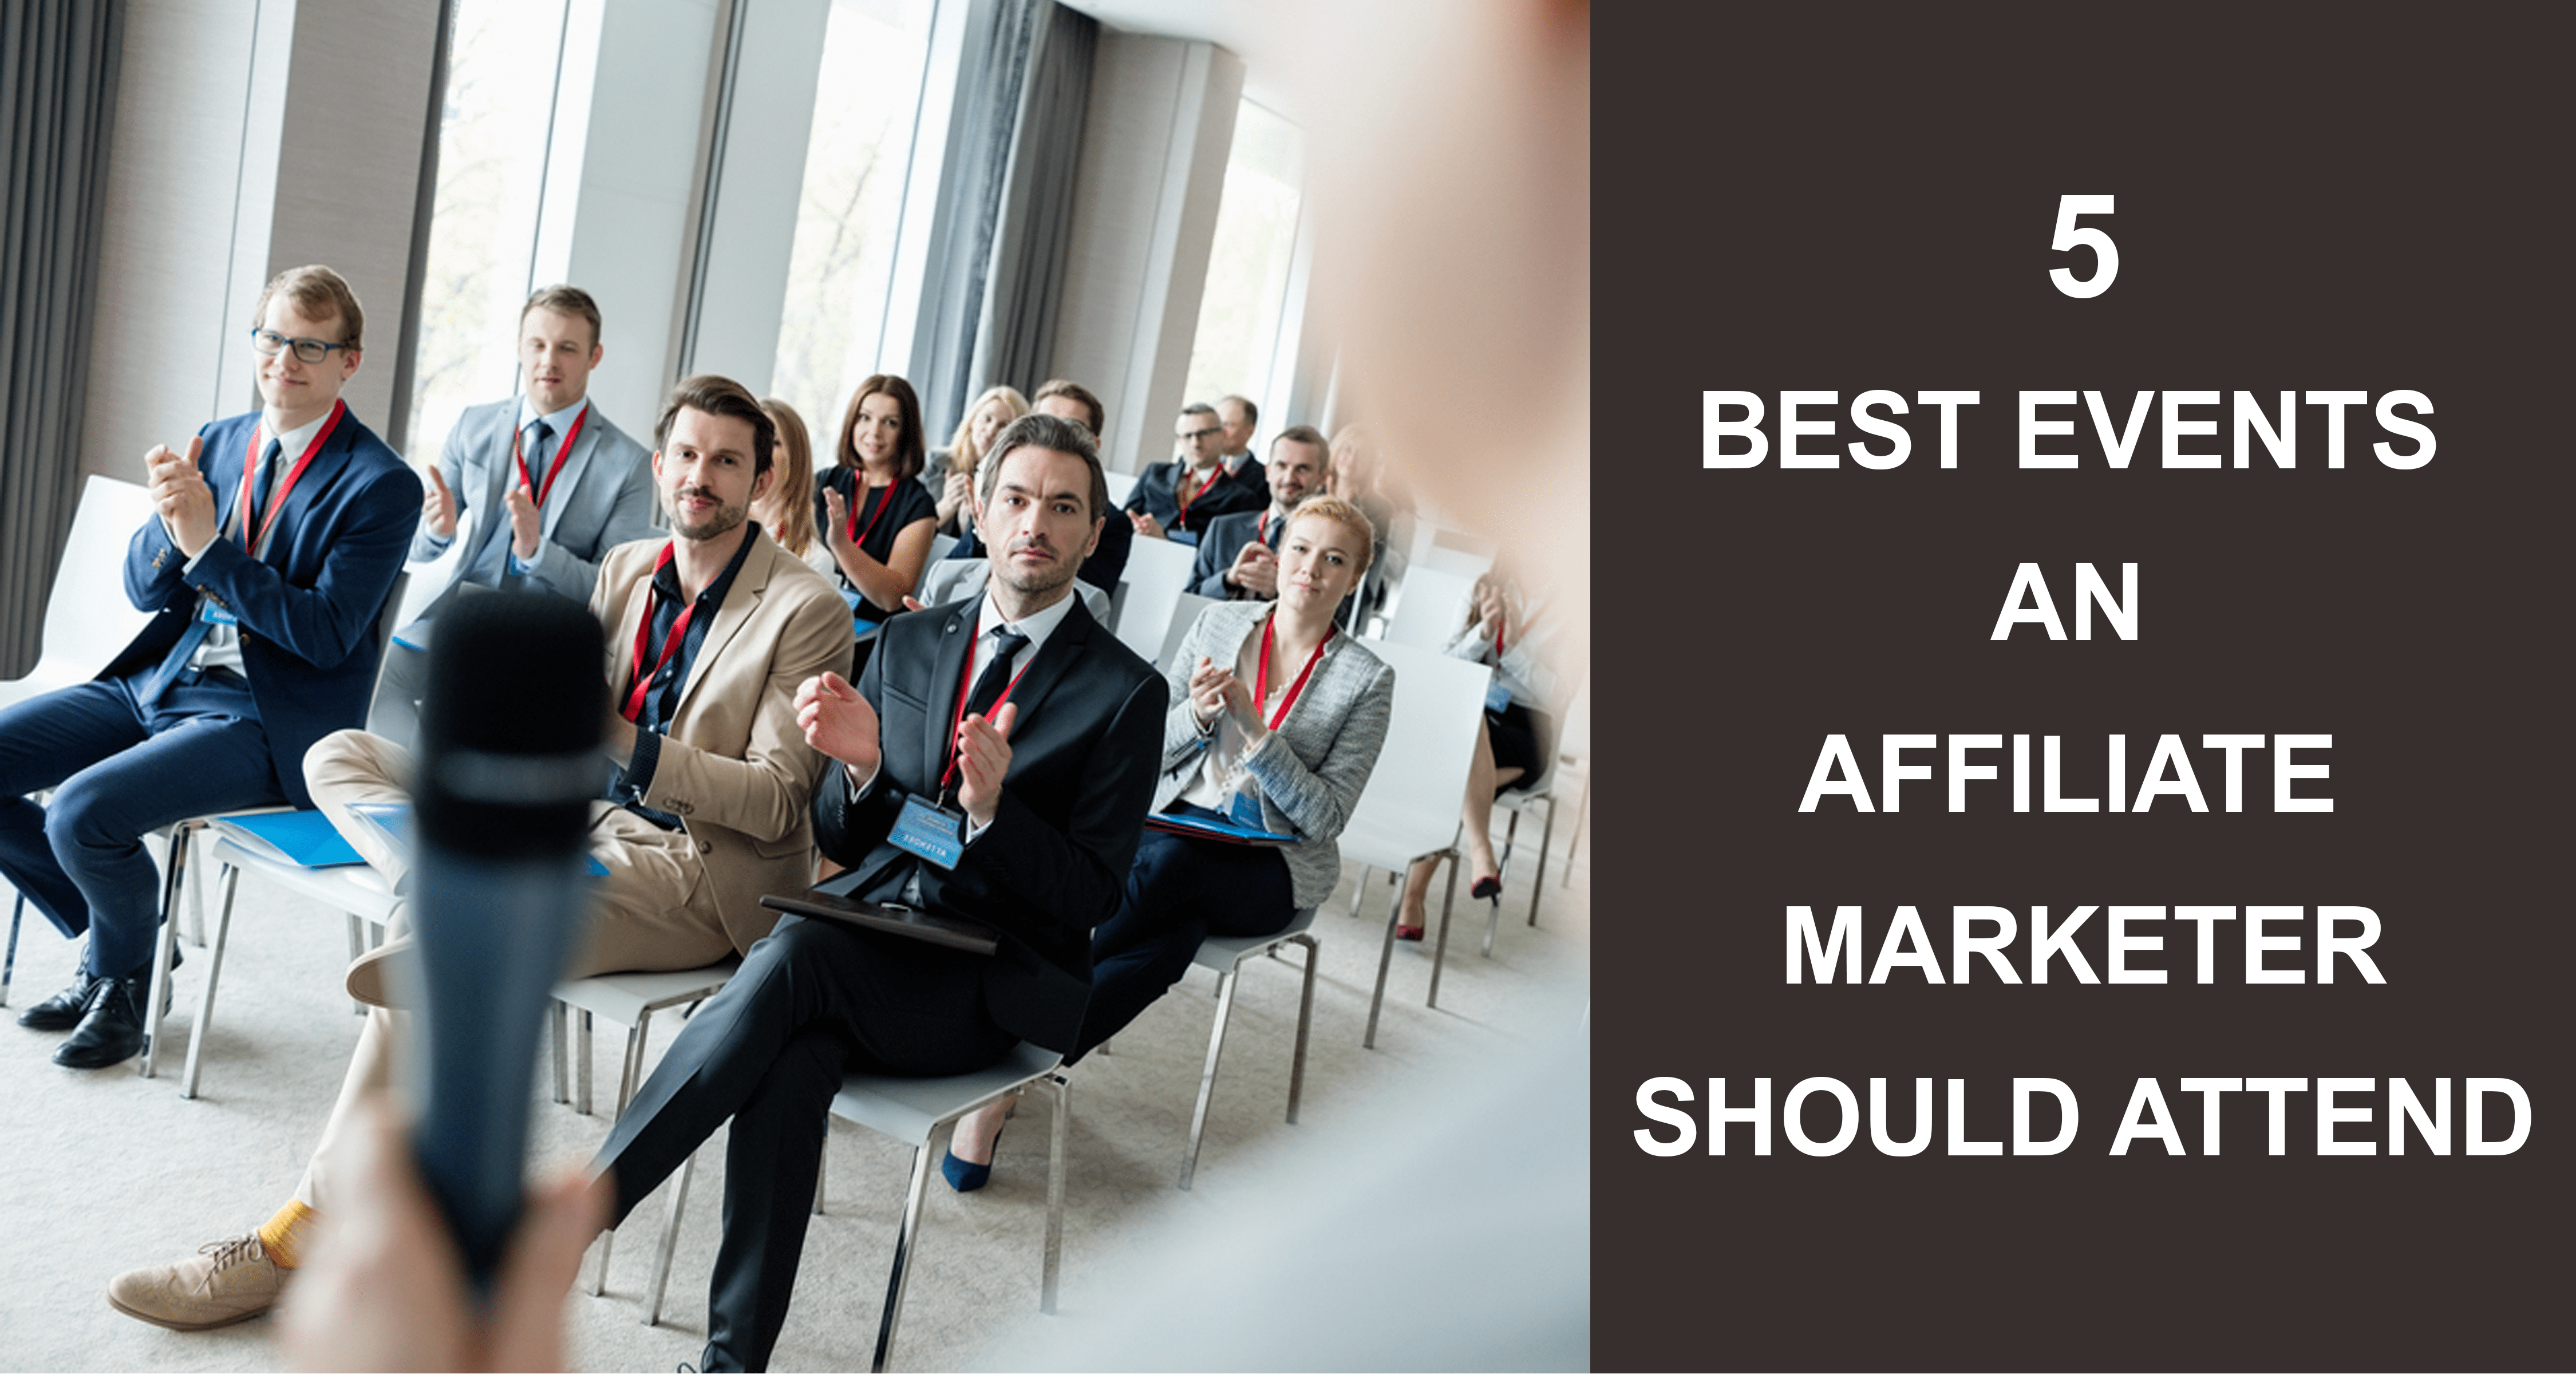 5 Best events an Affiliate Marketer should attend